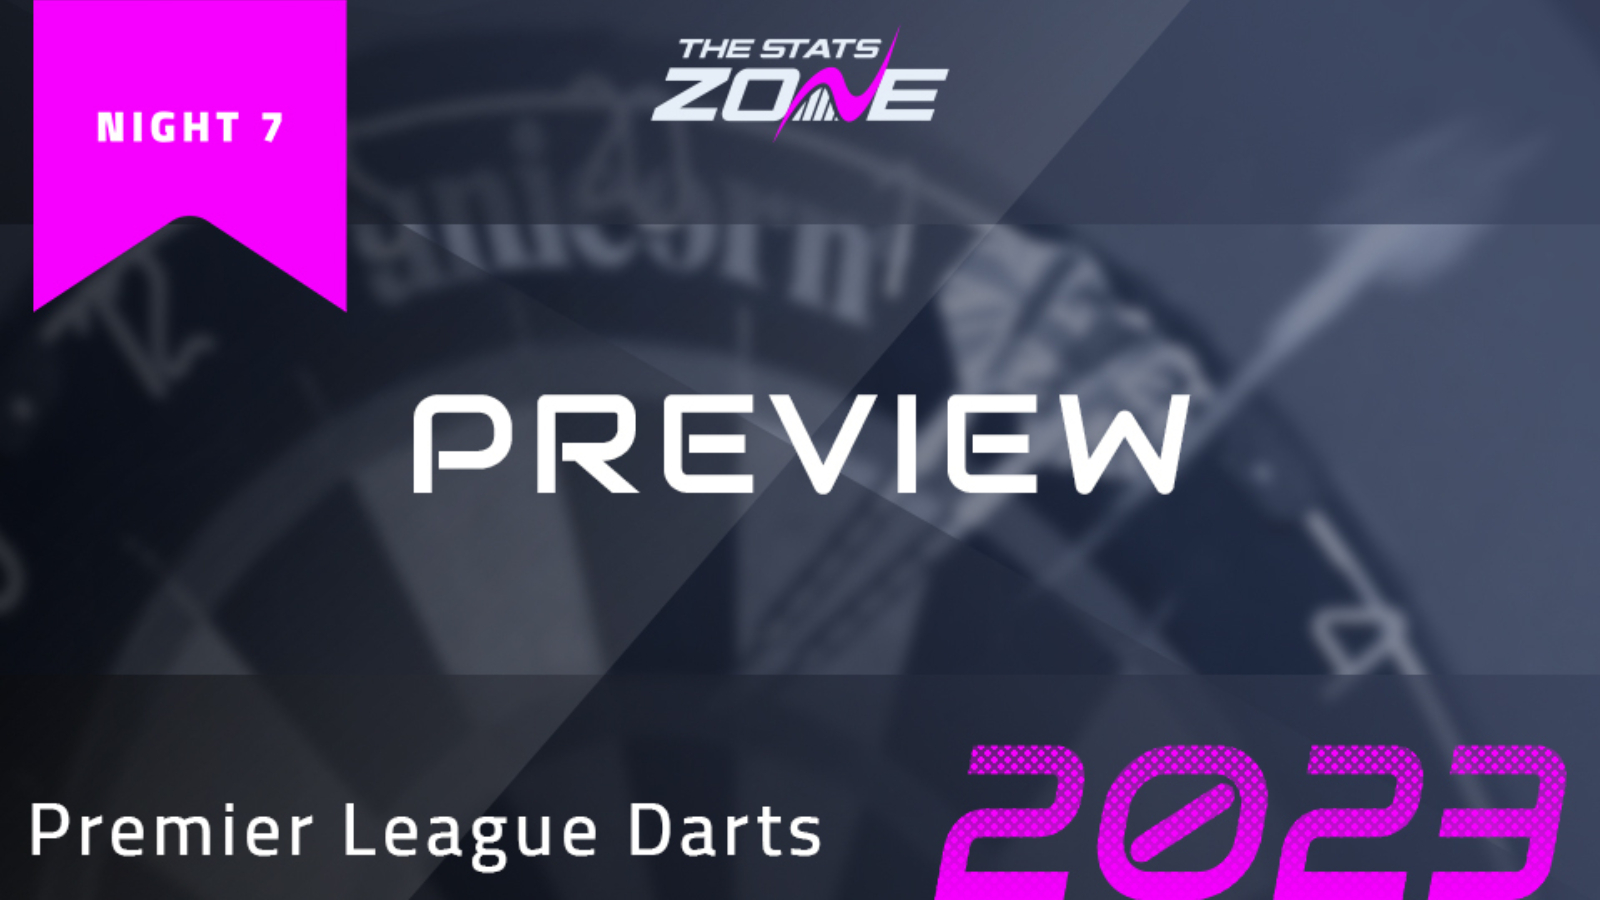 2023 Premier League Darts – Night 7 Preview | Nottingham | fixtures, league table, how to watch, who will win - The Stats